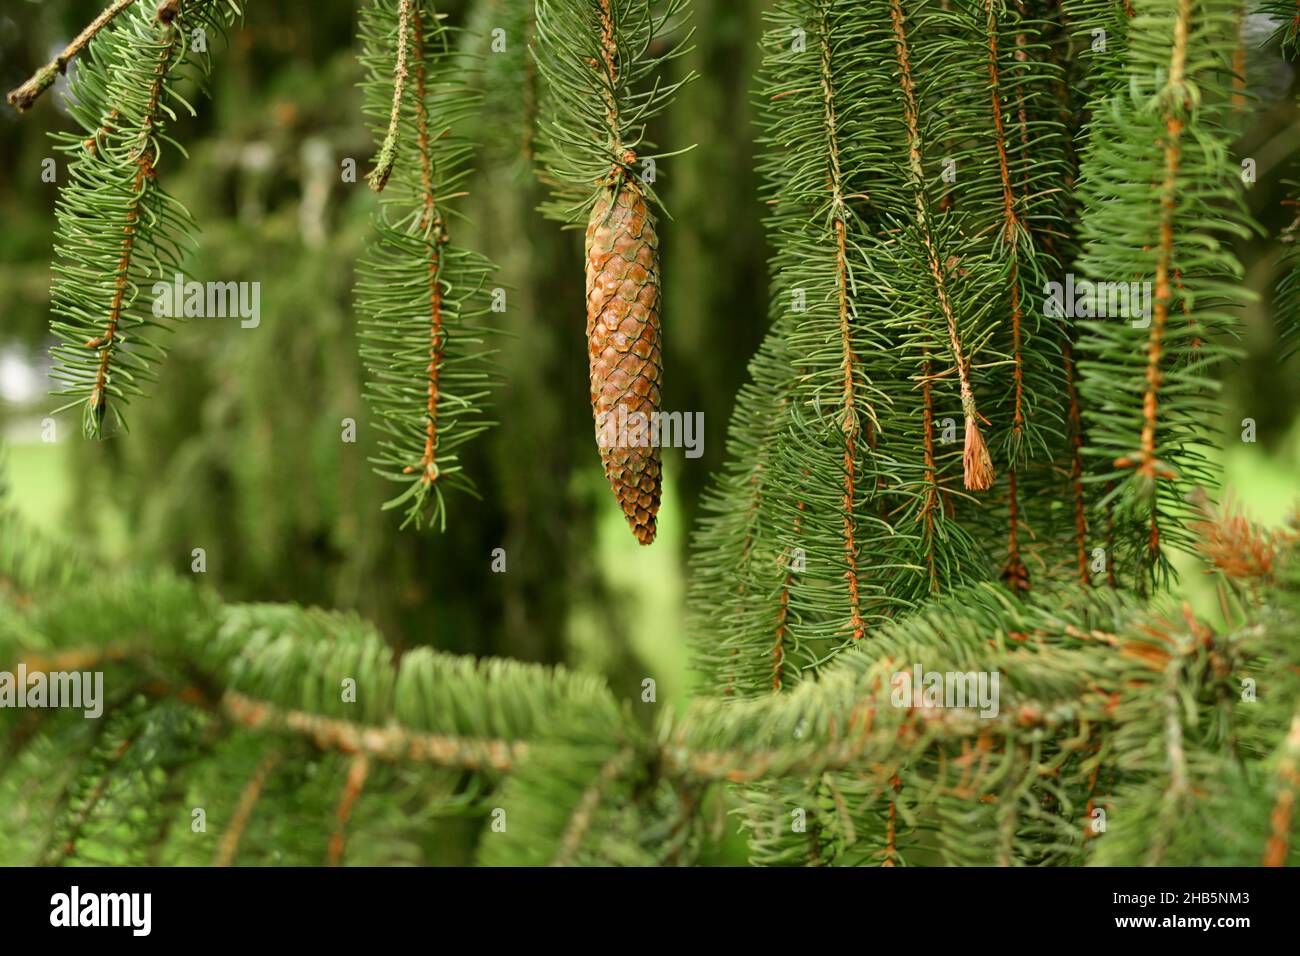 Weeping fir tree with hanging cone Stock Photo